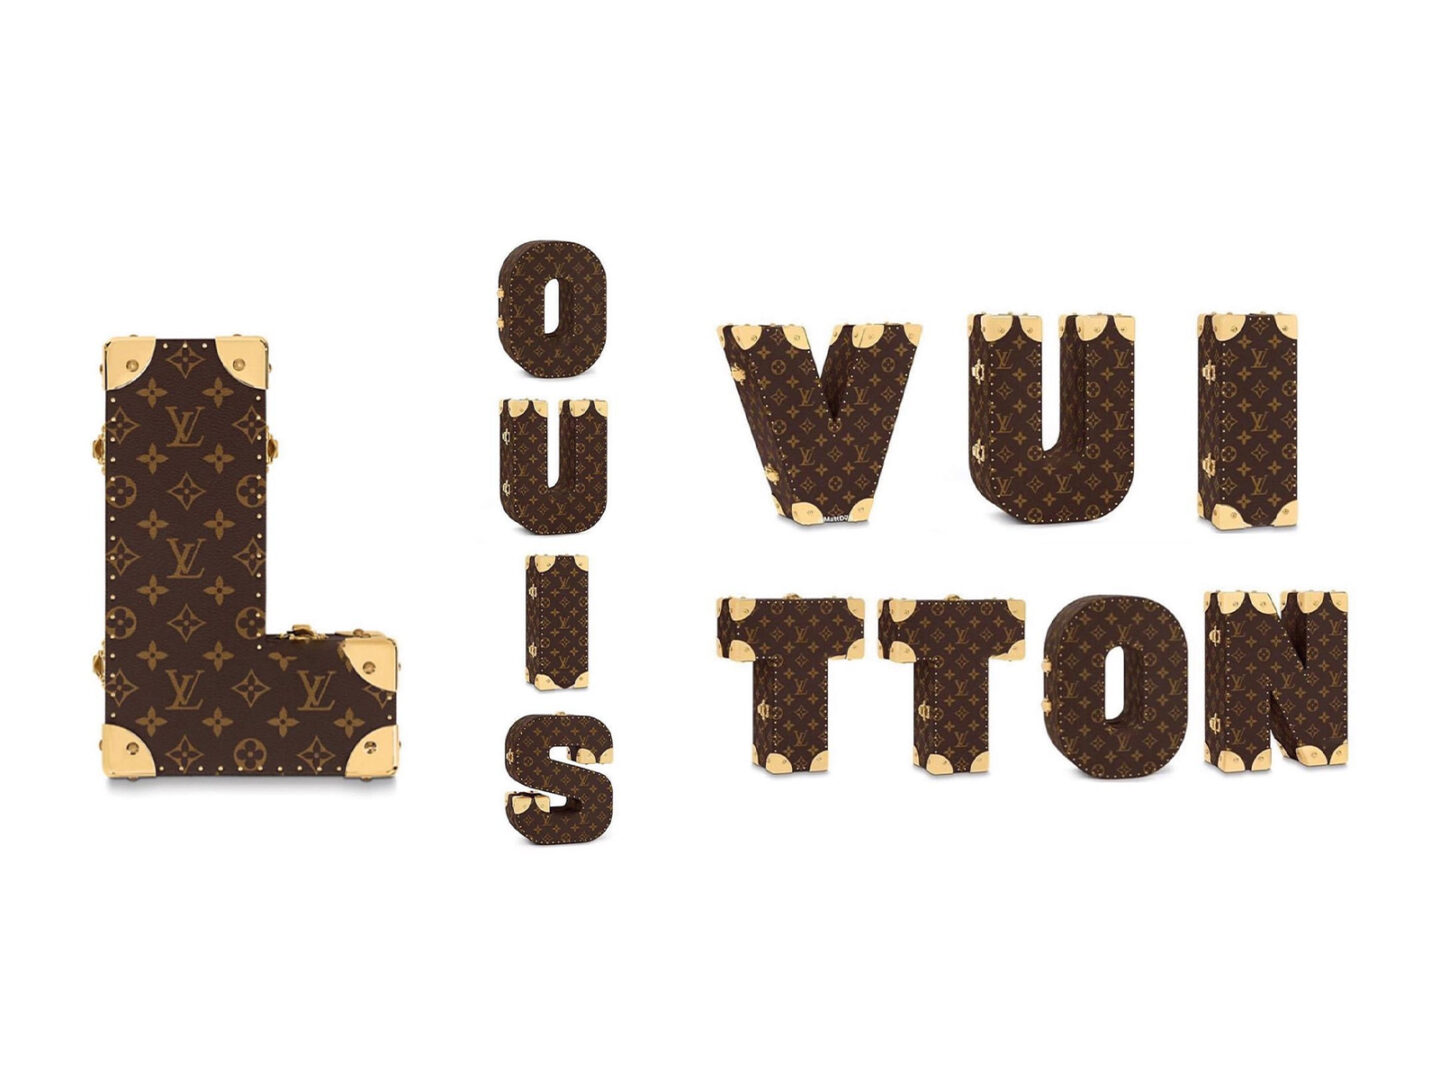 The new Louis Vuitton's sneaker trunks for collectors